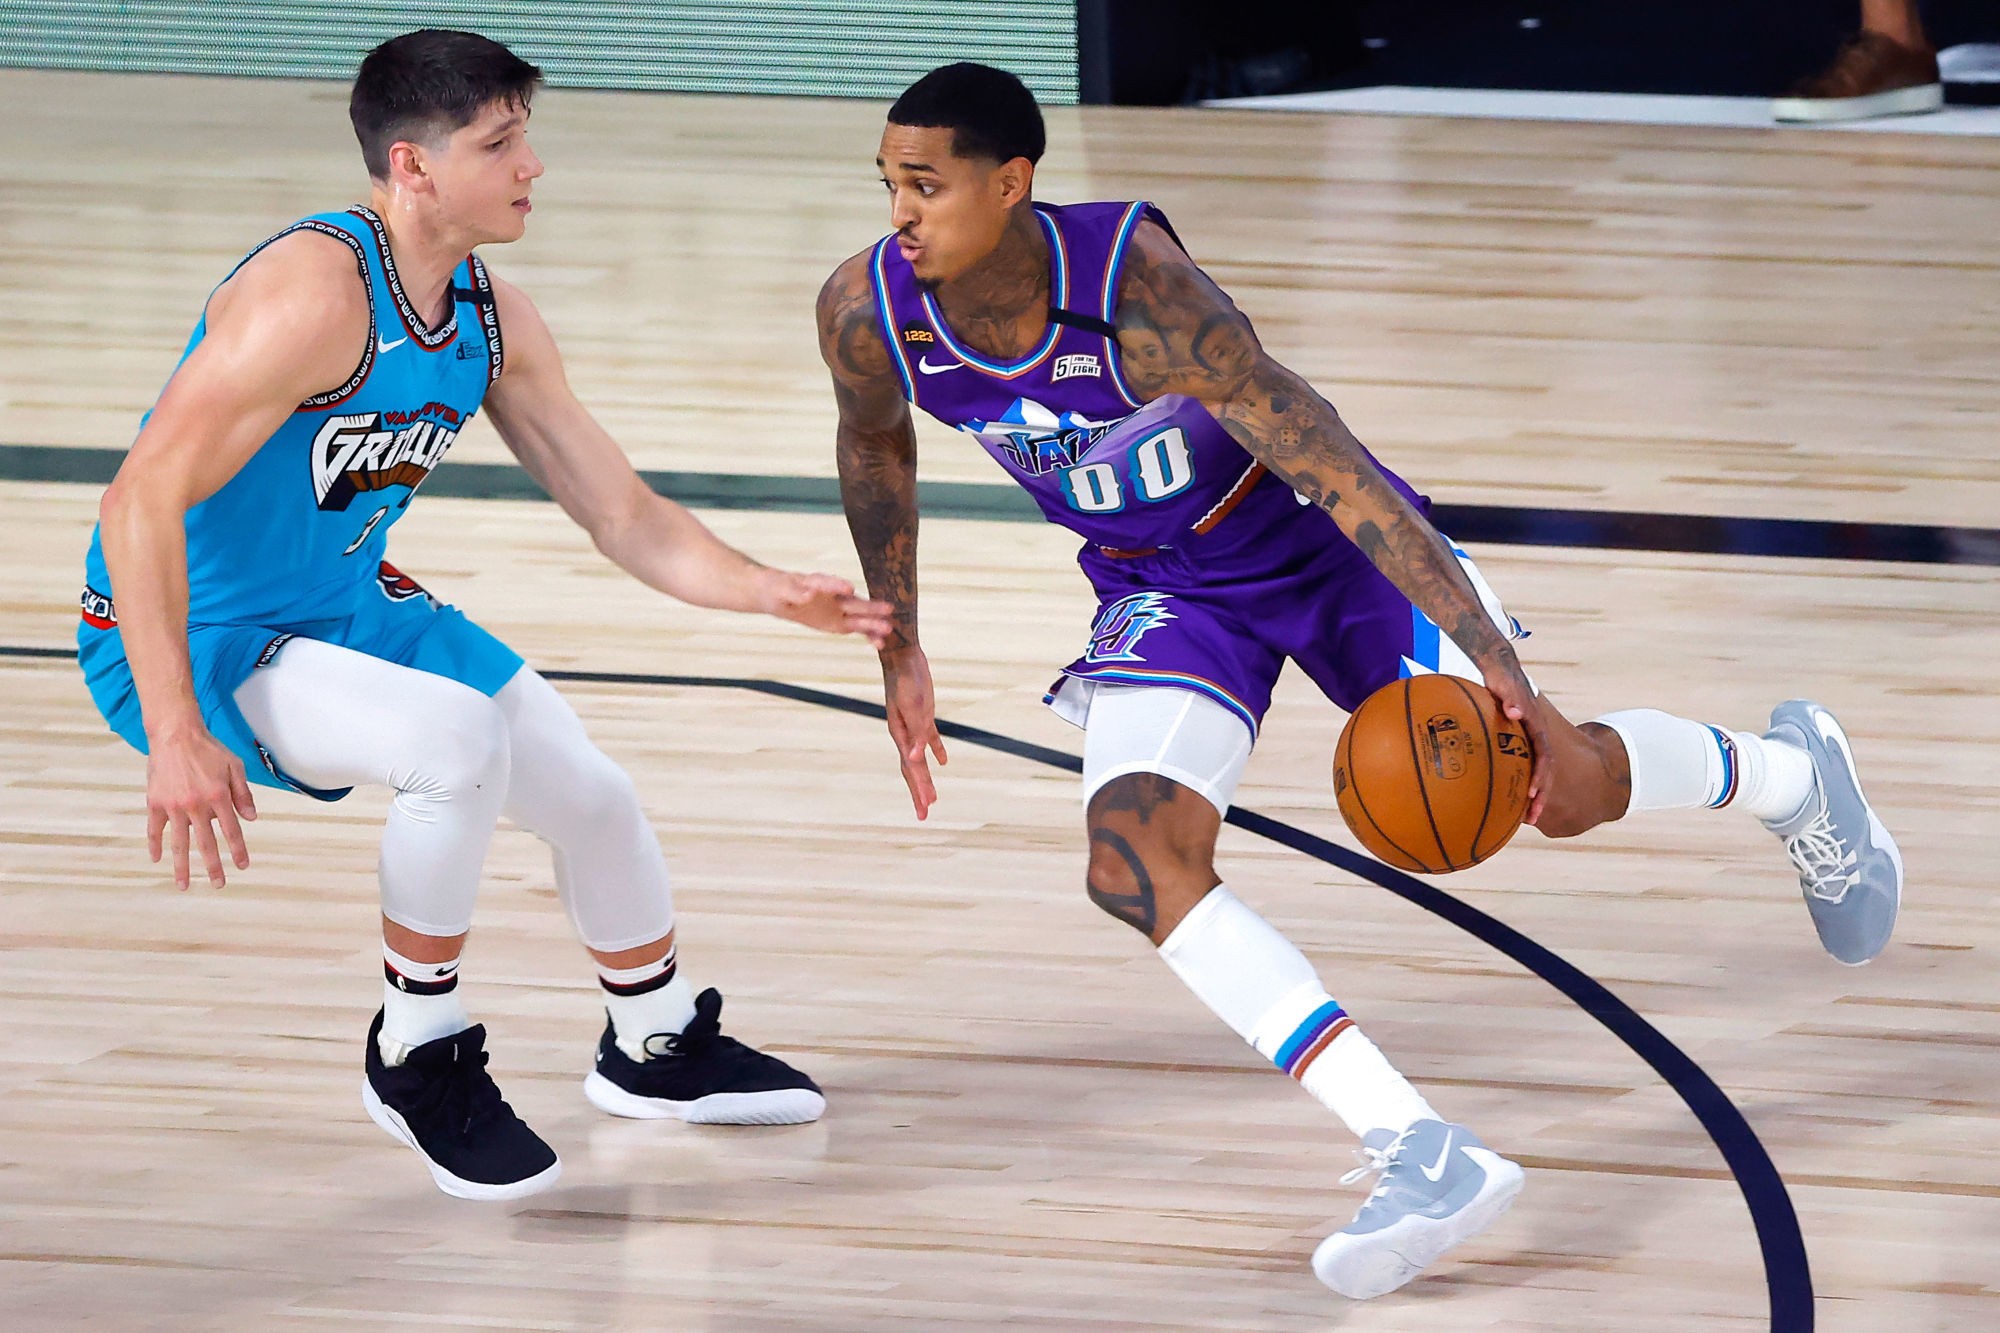 Aug 5, 2020; Lake Buena Vista, Florida, USA; Jordan Clarkson #00 of the Utah Jazz dribbles in front of Grayson Allen #3 of the Memphis Grizzlies during the second half at HP Field House at ESPN Wide World Of Sports Complex on August 5, 2020 in Lake Buena Vista, Florida. Mandatory Credit: Kevin C. Cox/Pool Photo-USA TODAY Sports/Sipa USA 
By Icon Sport -  (Etats Unis)